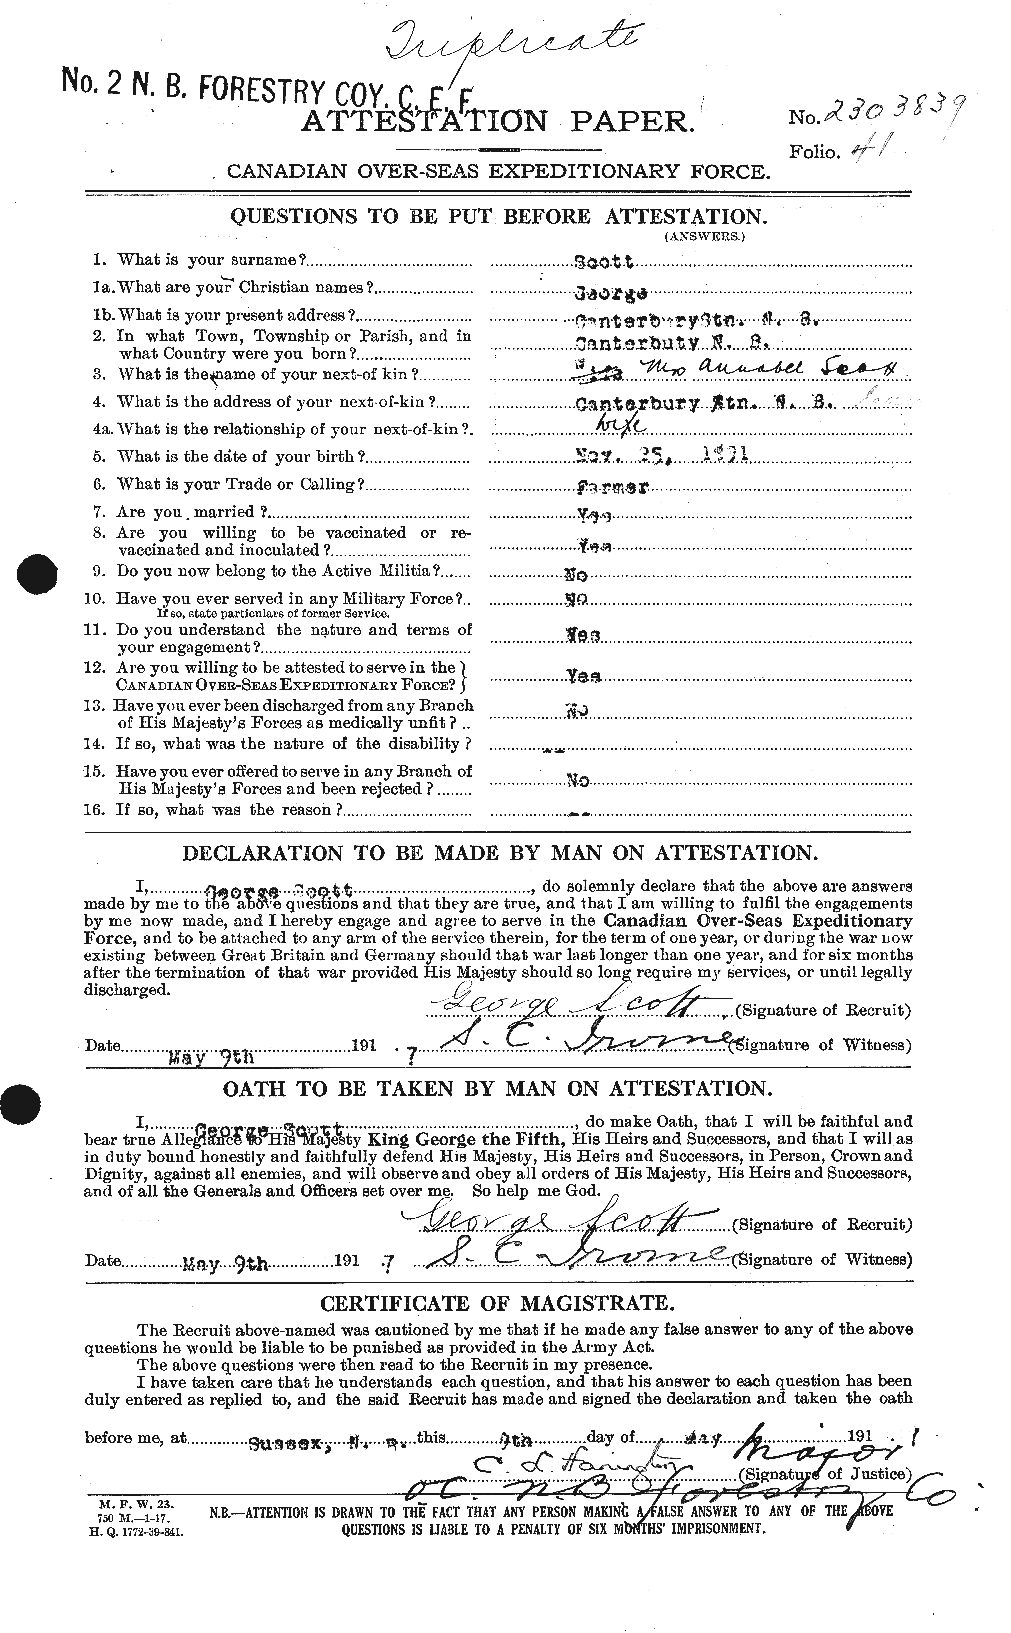 Personnel Records of the First World War - CEF 084355a